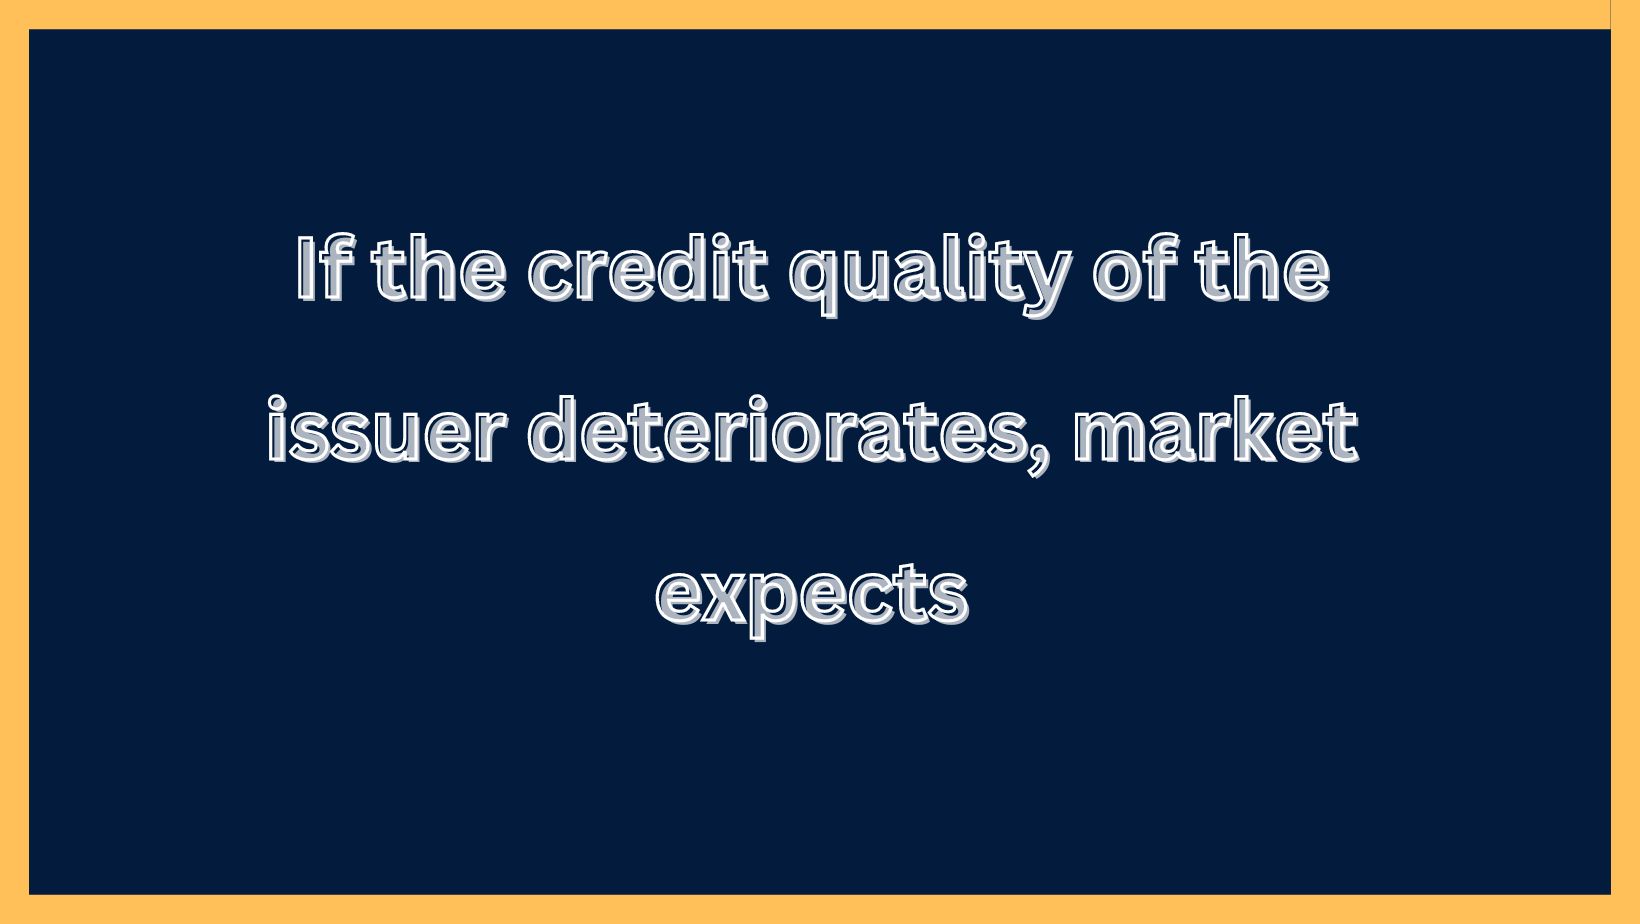 If the credit quality of the issuer deteriorates, market expects